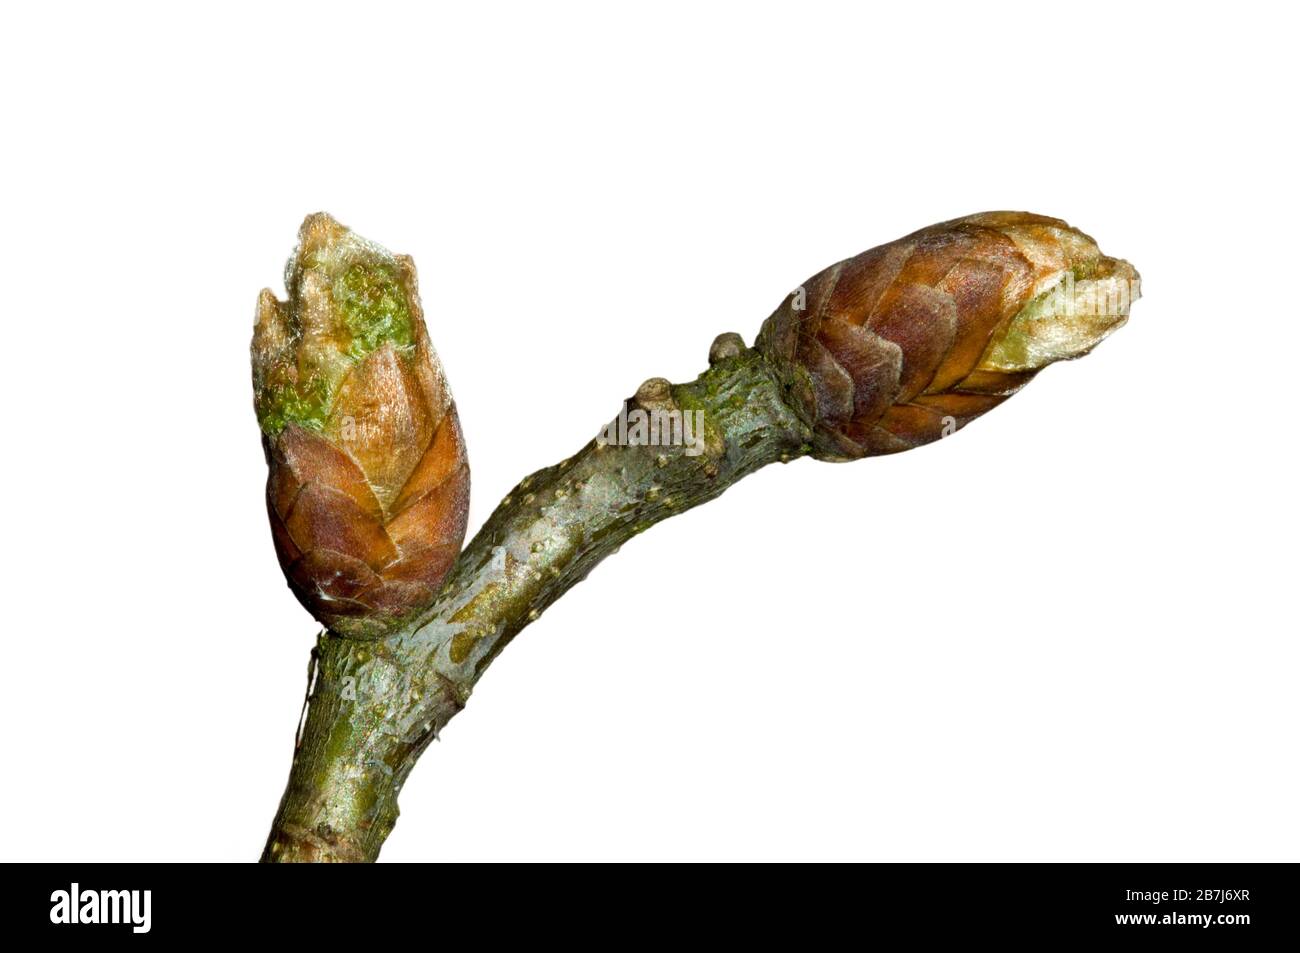 Common oak / pedunculate oak / English oak (Quercus robur) close up of twig with leaf buds opening in spring against white background Stock Photo